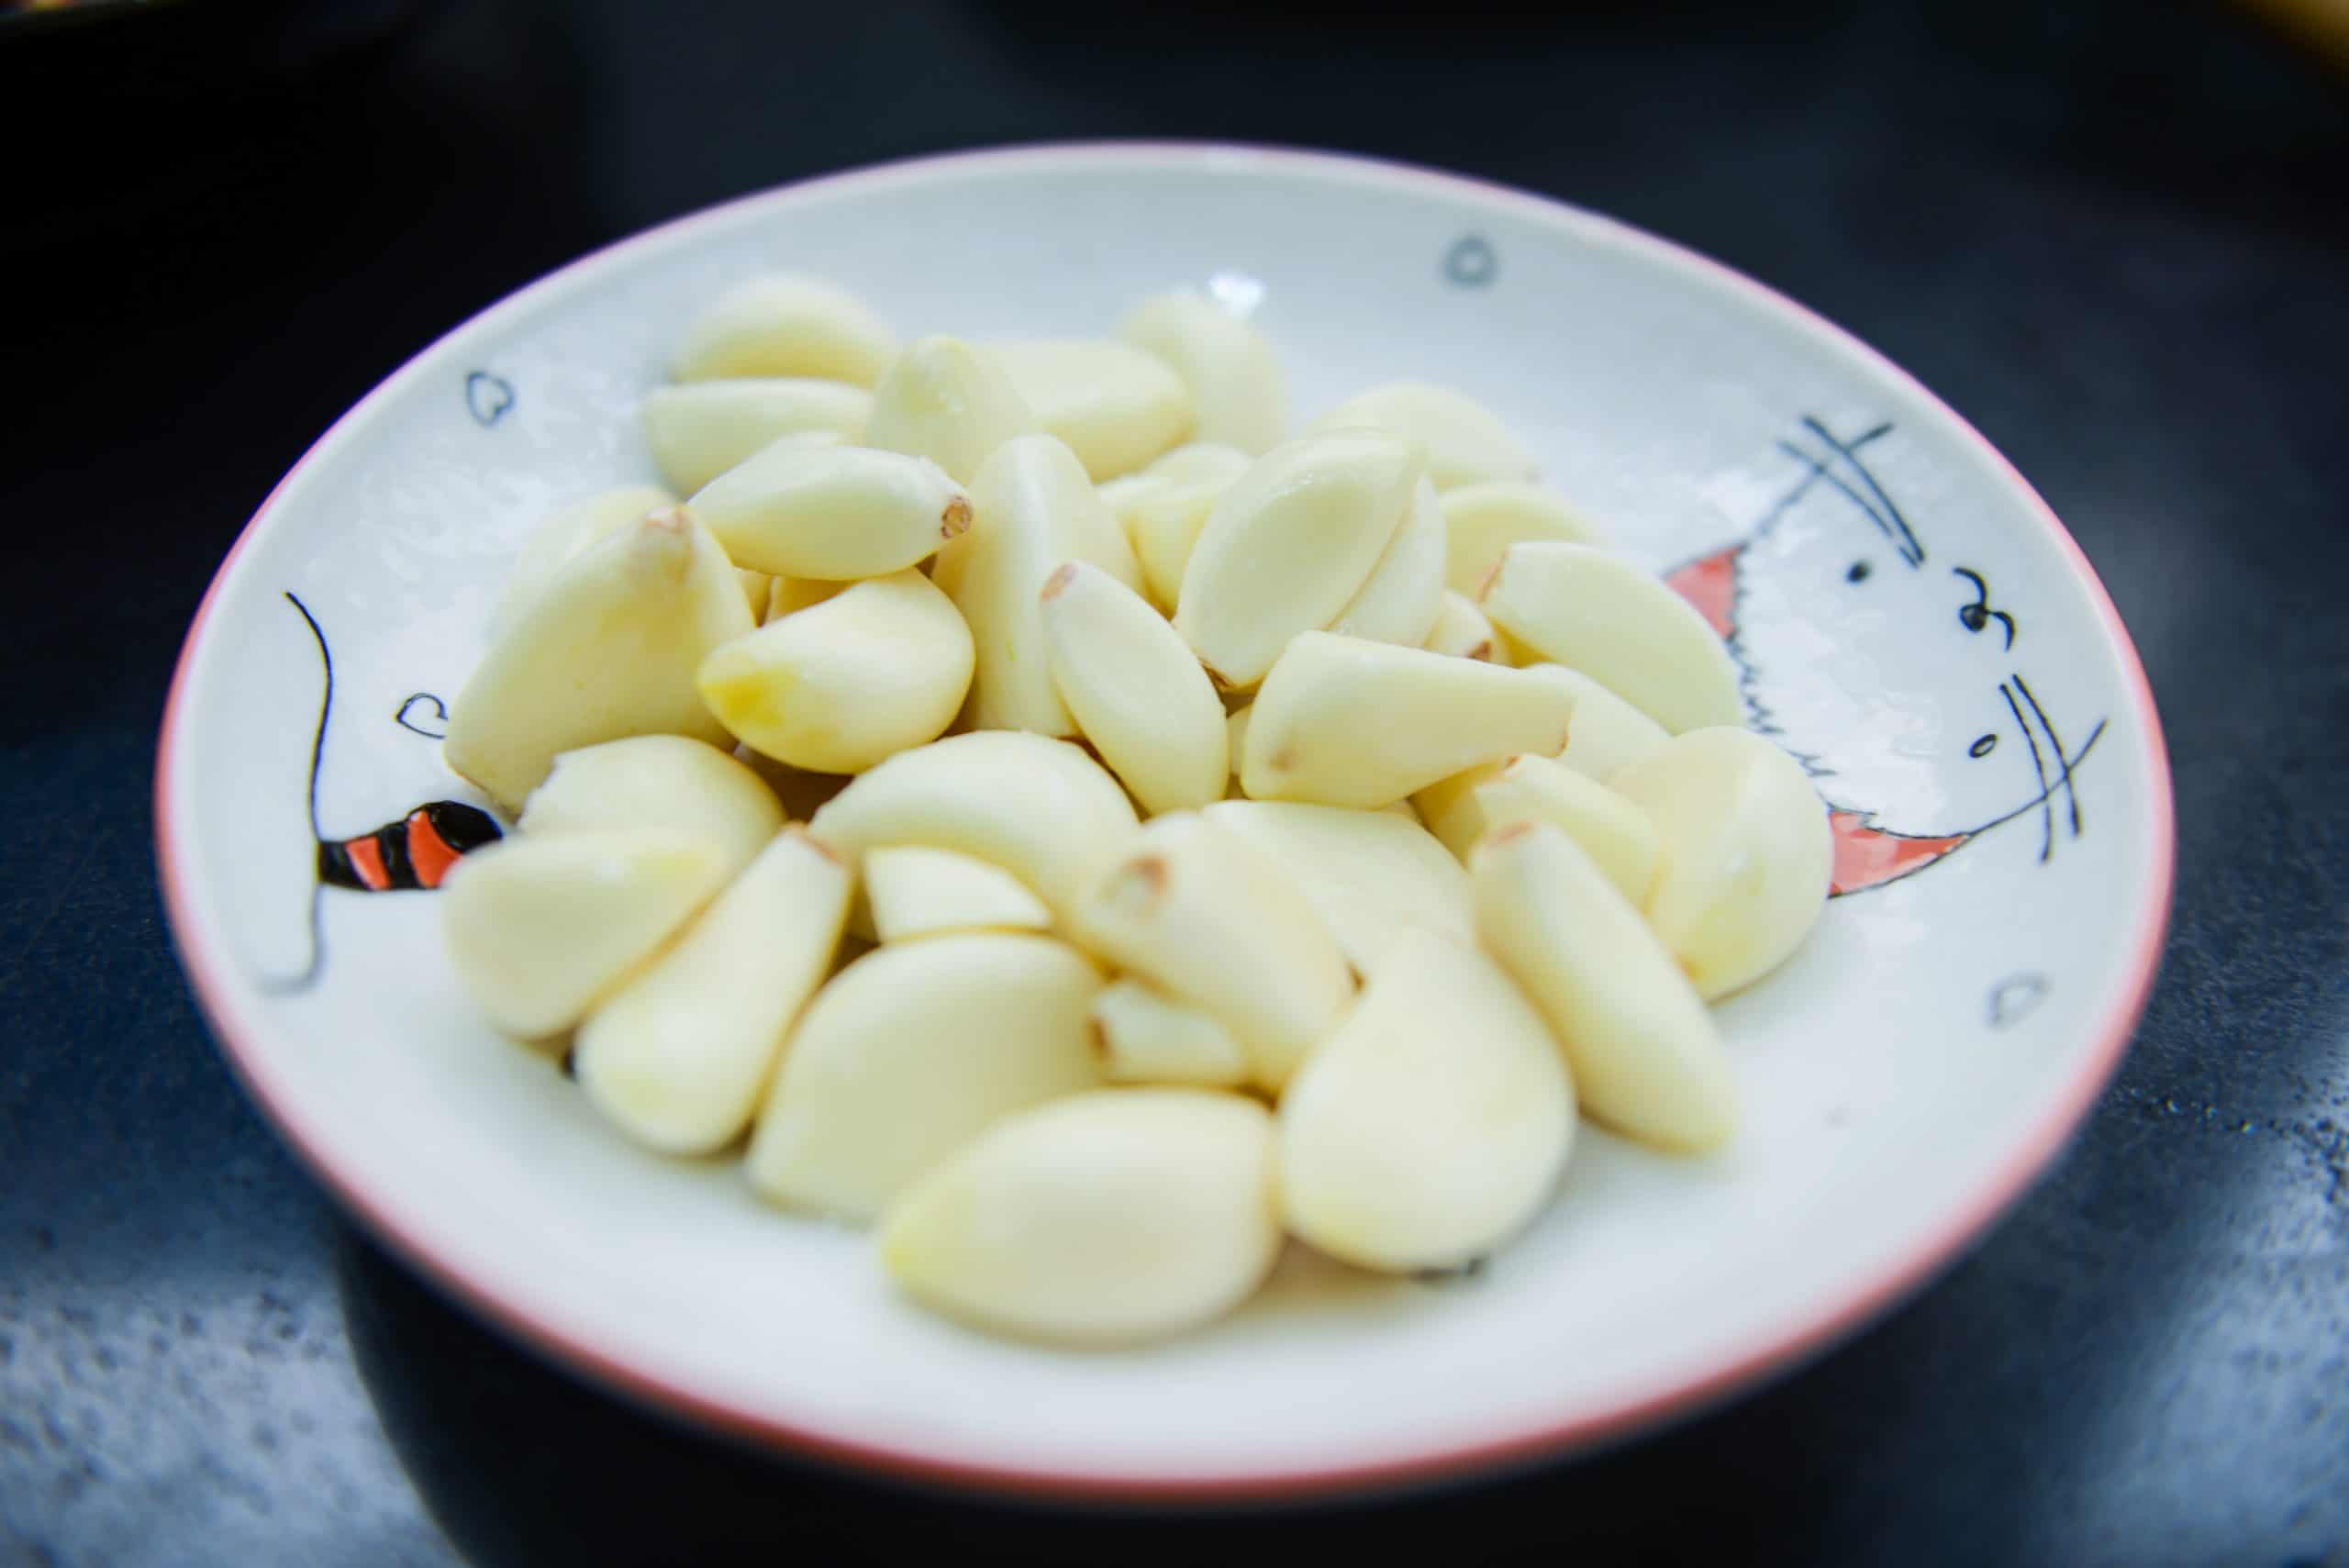 garlic instant toothache remedy at home